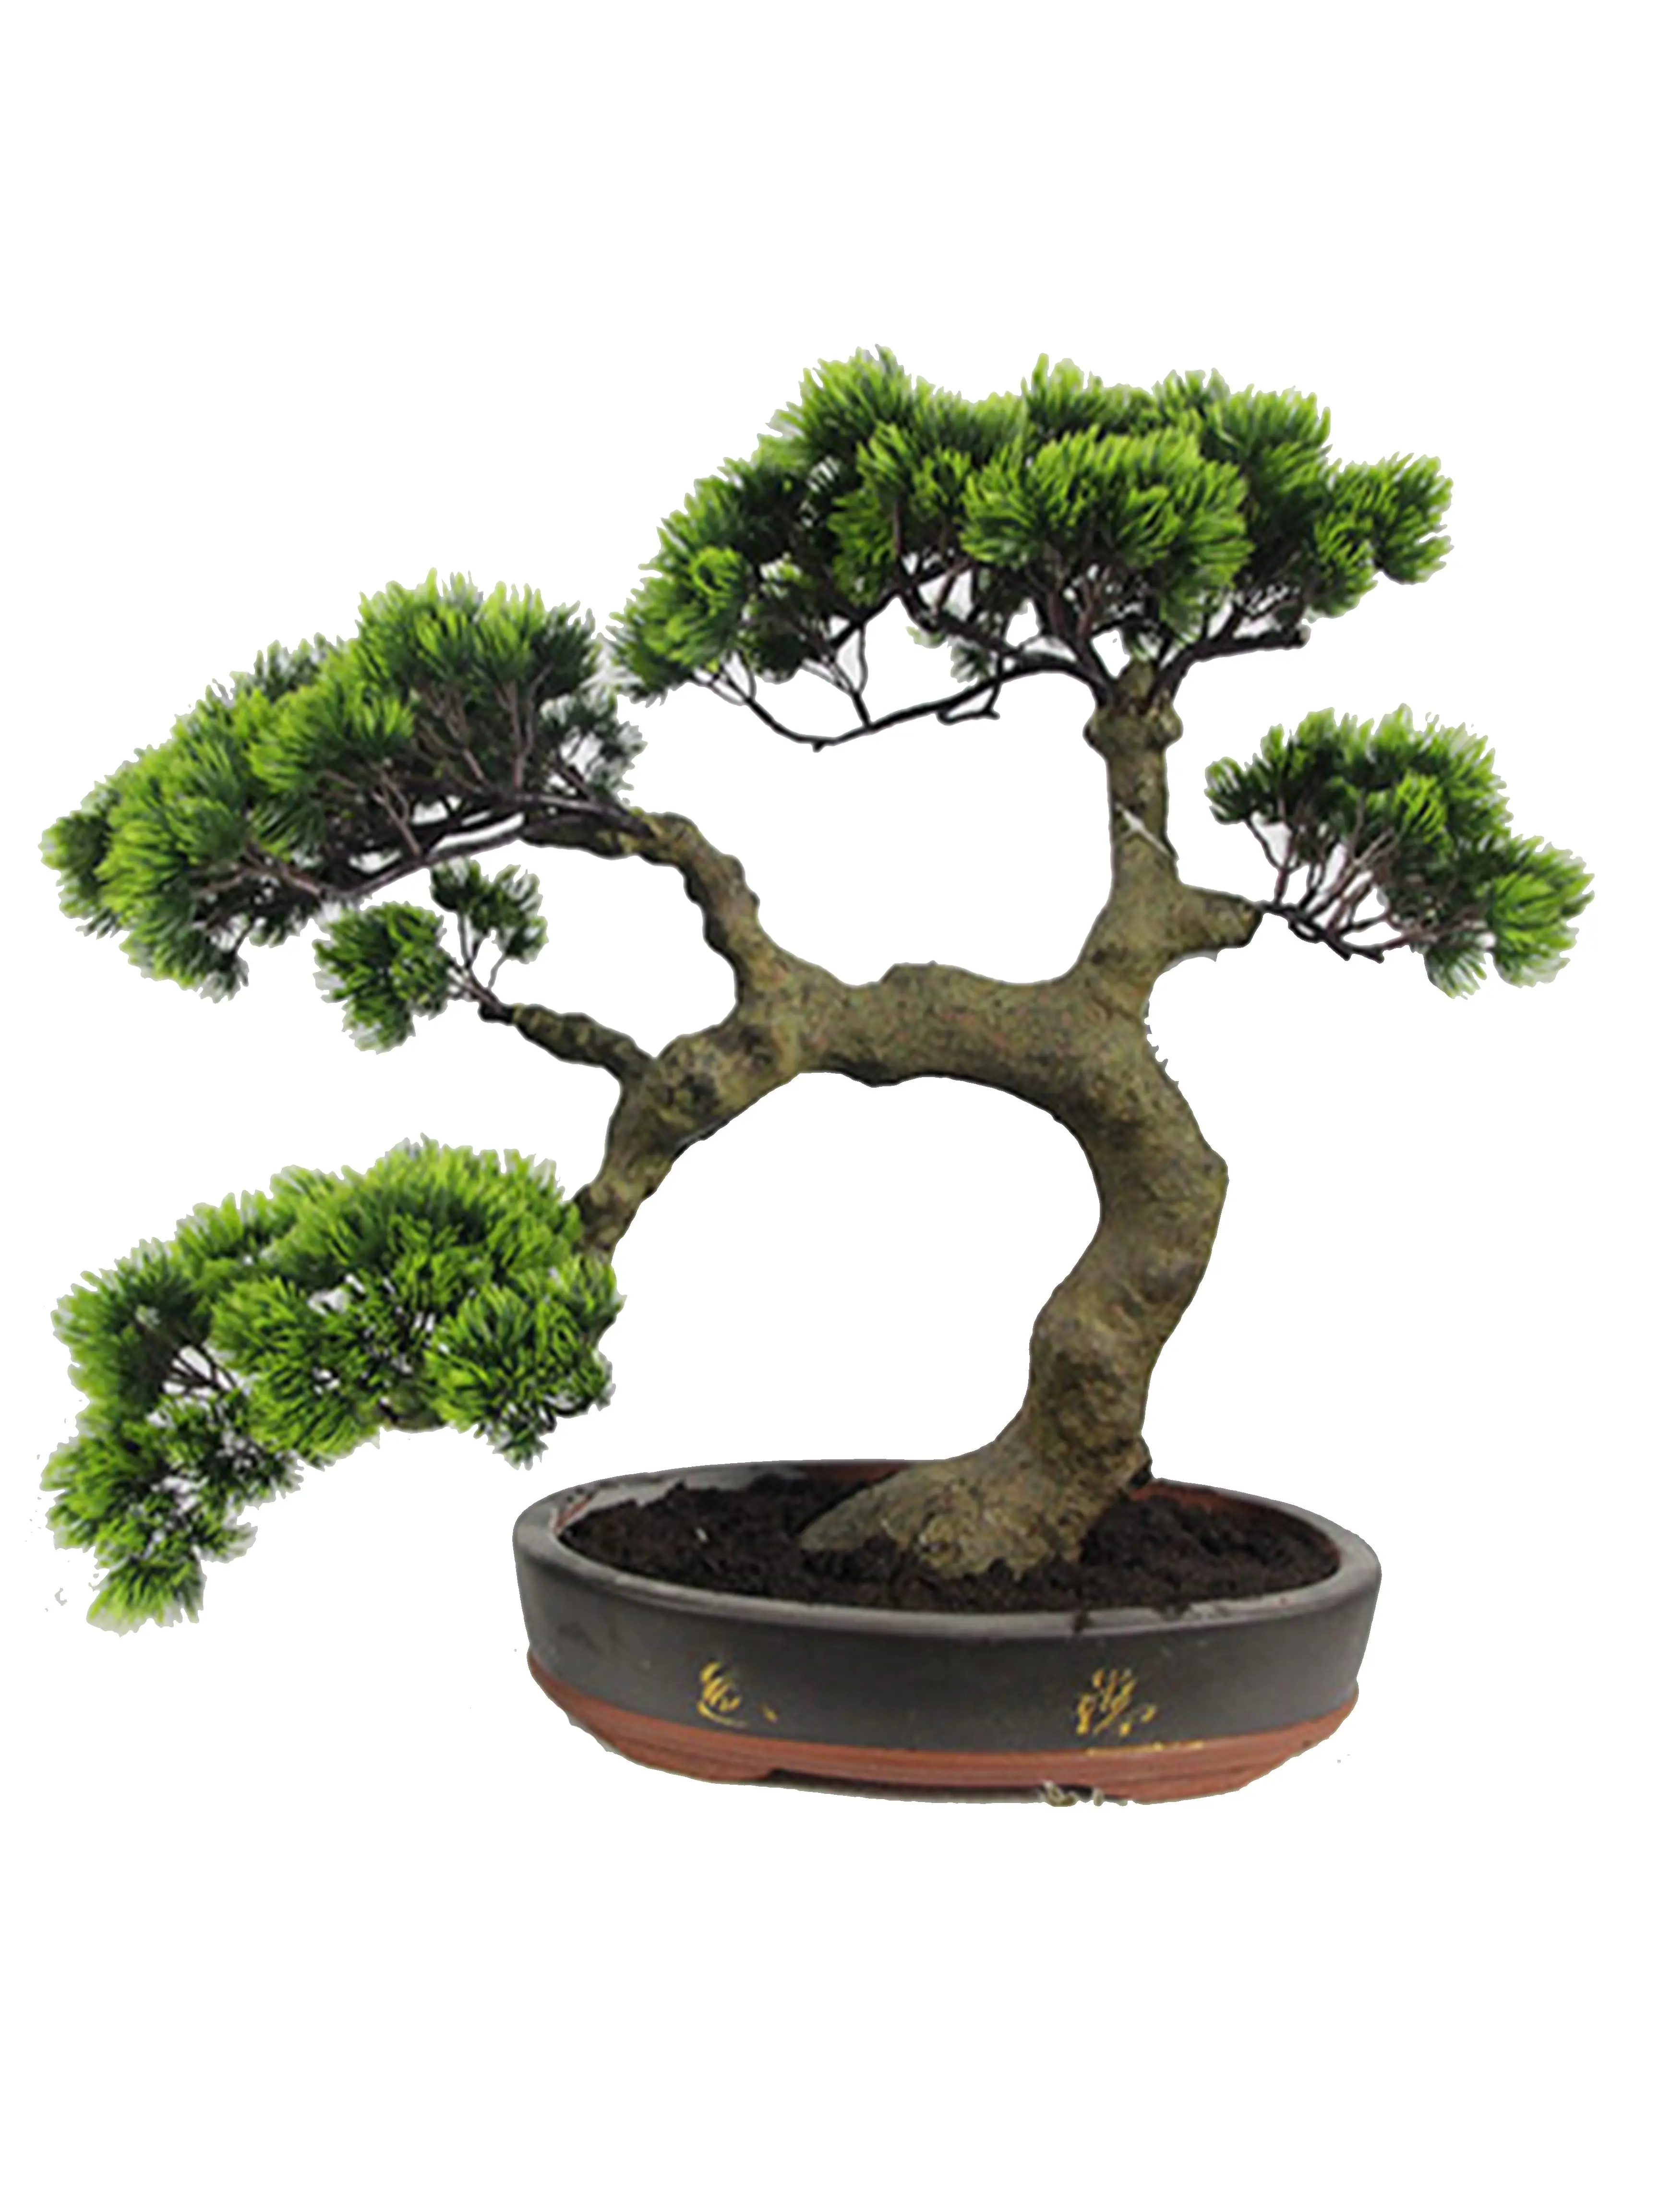 High Quality Artificial Plante Welcome Pine Bonsai Tree Top Sales Plants Decorative For Indoor Outdoor Buy Bonsai Plants Plante Artificielle Welcome Pine Product On Alibaba Com